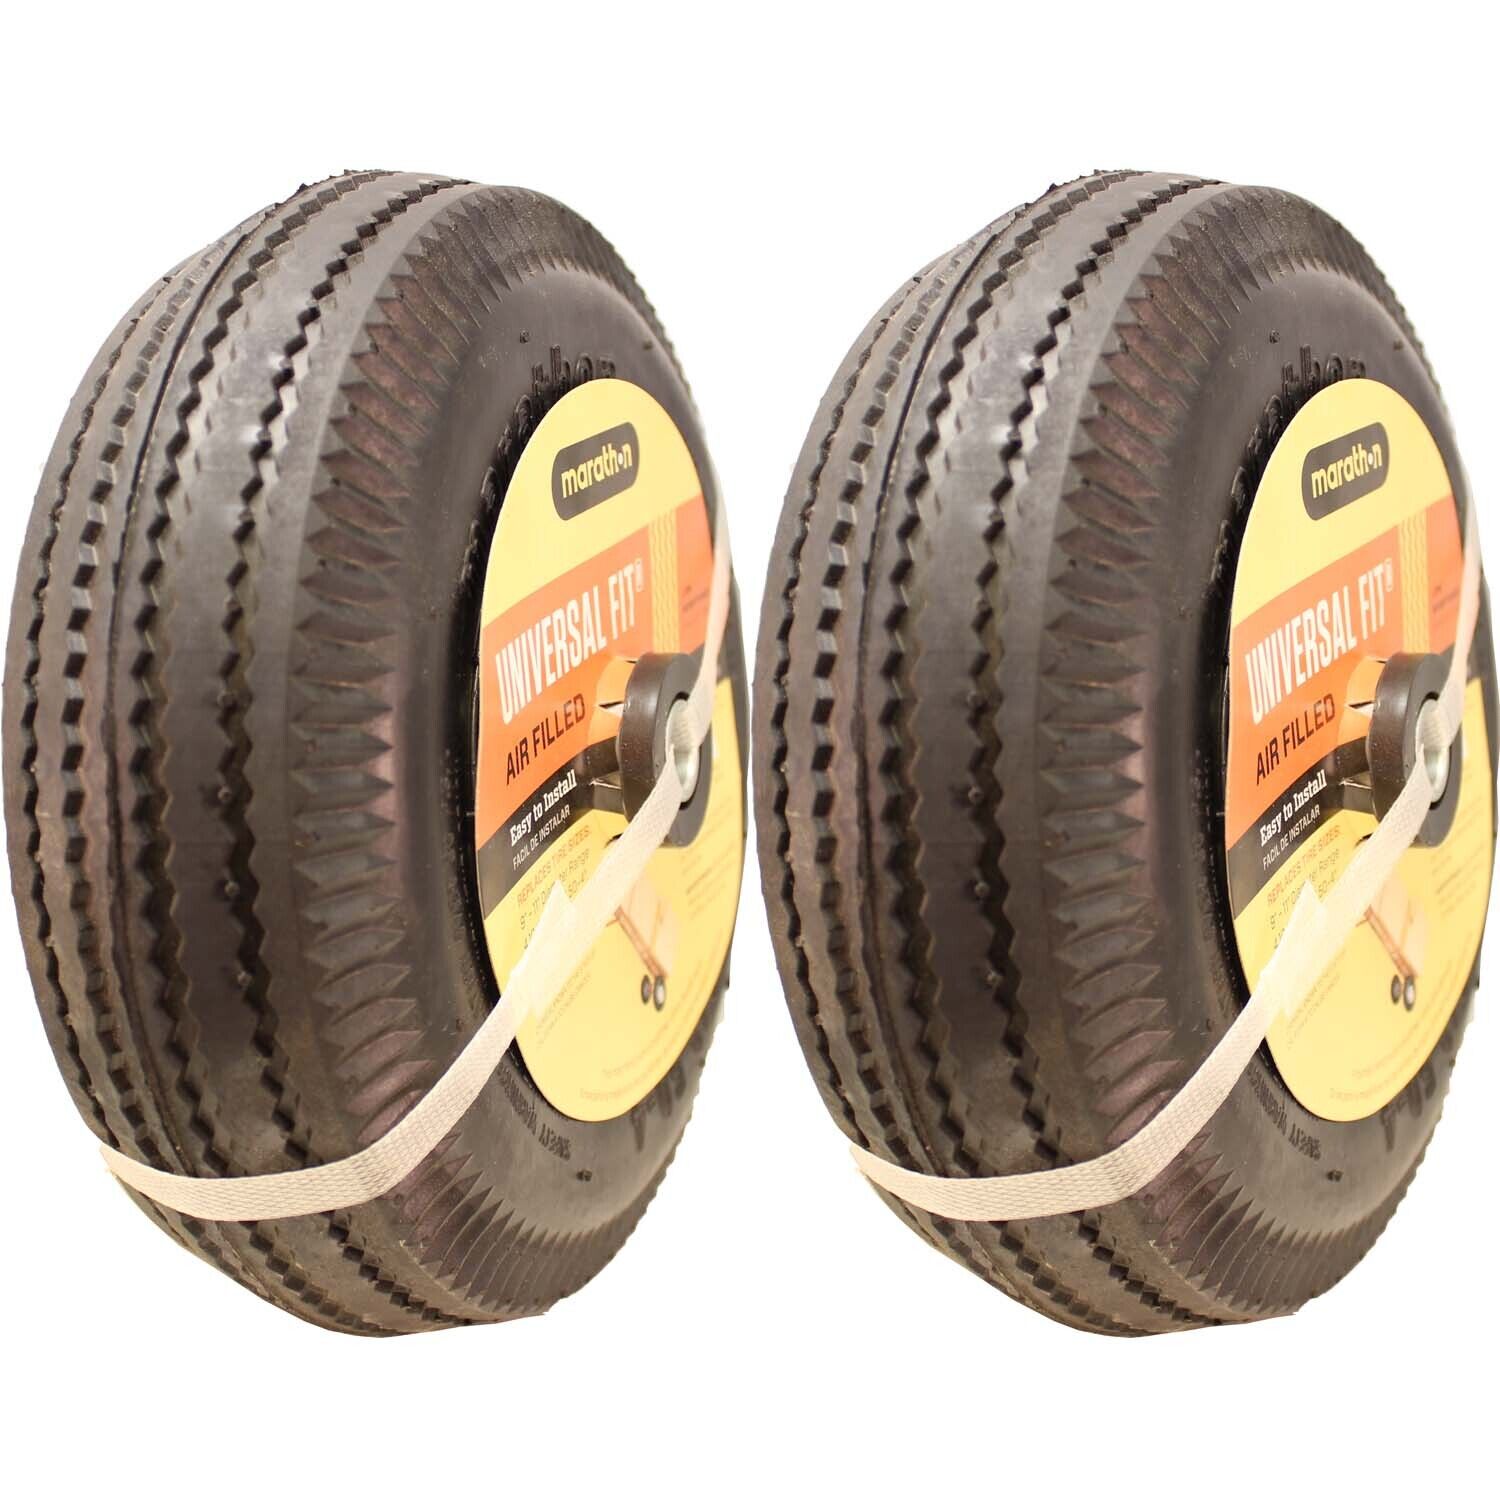 Marathon 20210 Pneumatic Air Universal Fit Utility Tire 4.10/3.50-4 Pack of 2